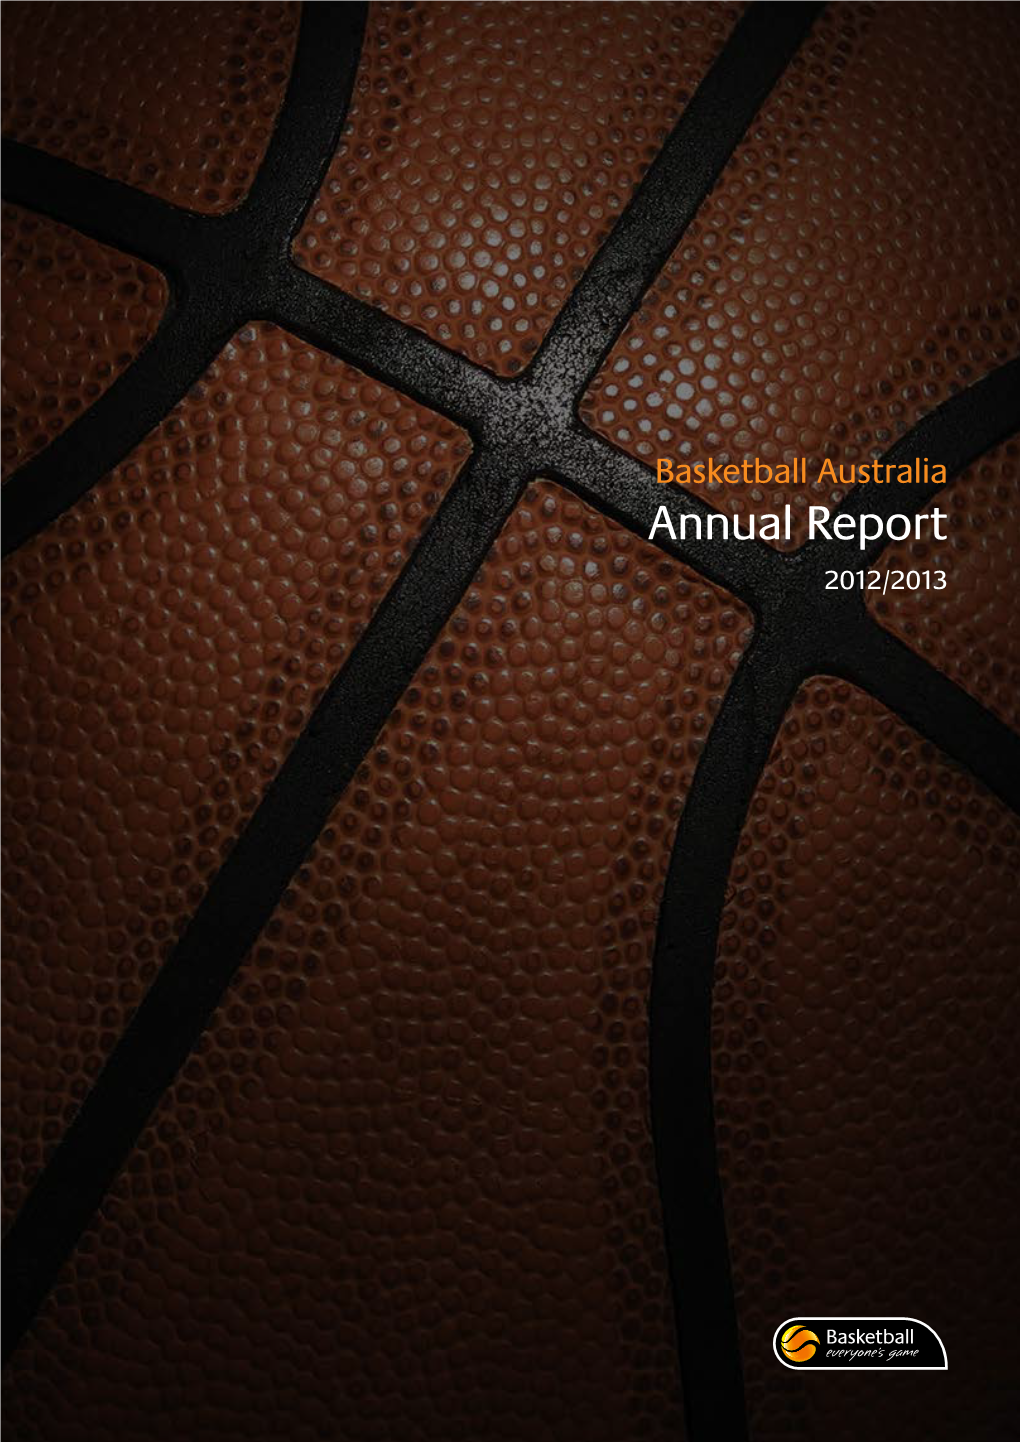 Annual Report 2012/2013 Contents